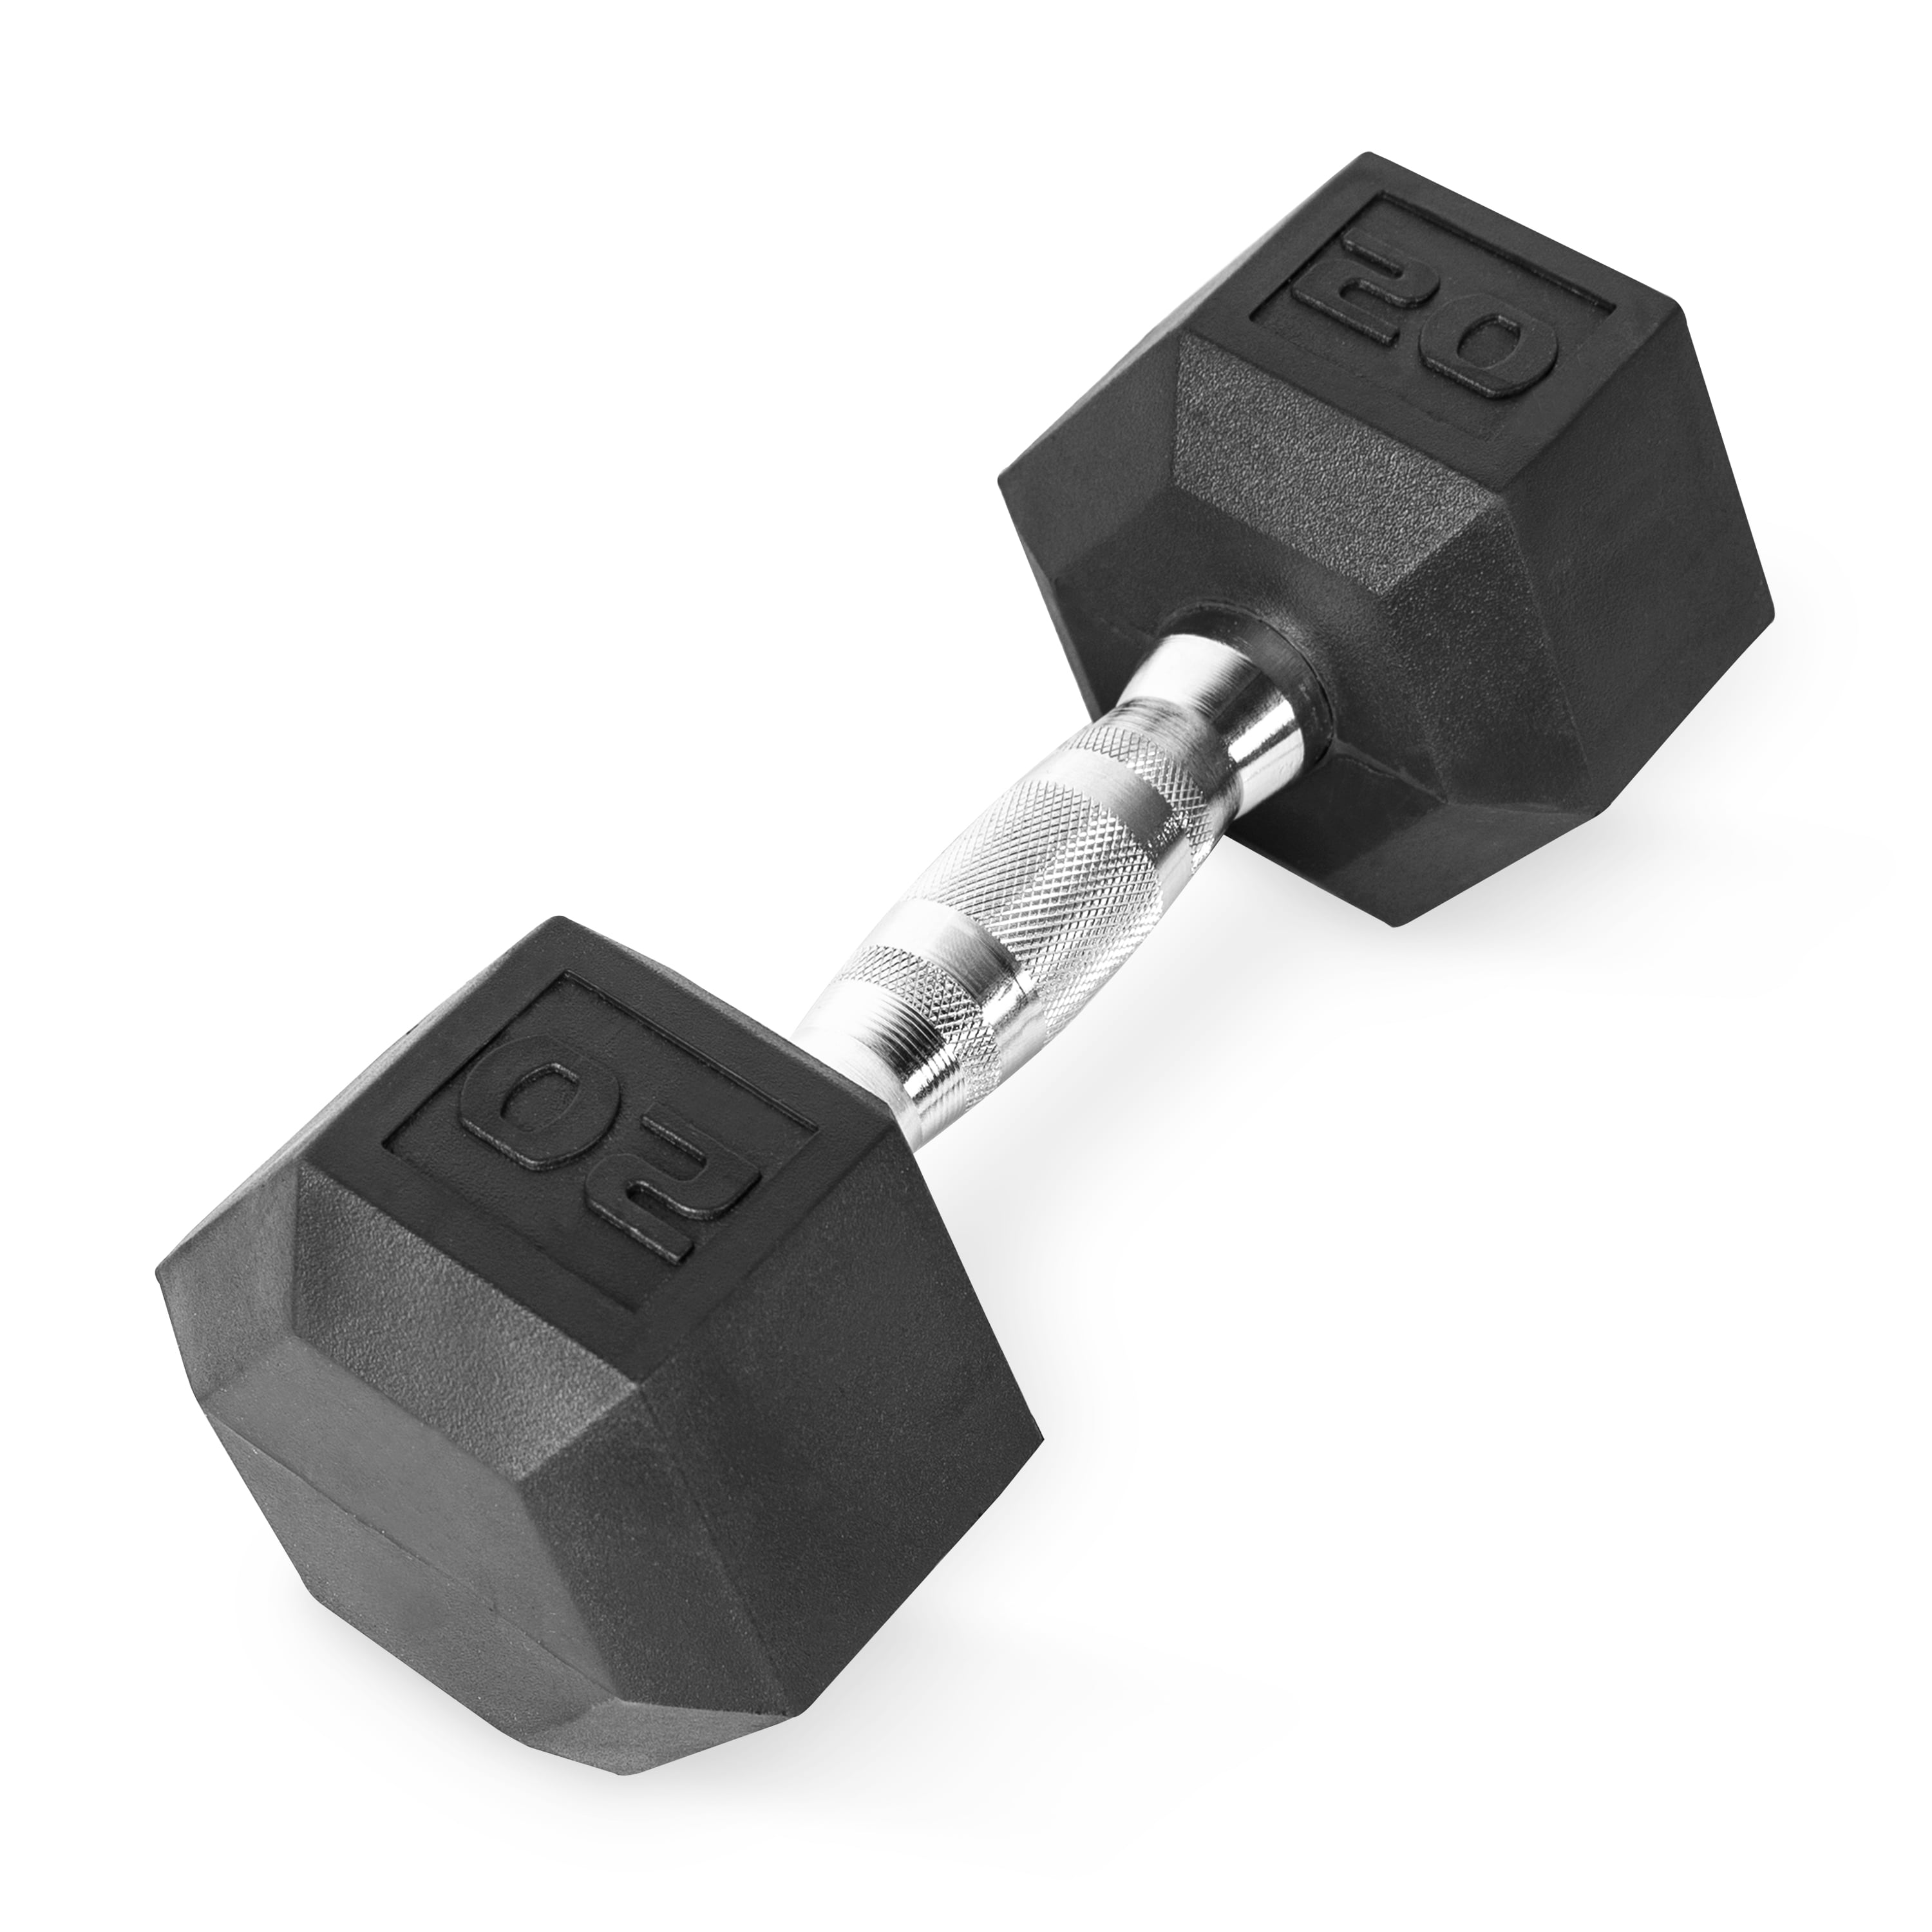 DRH25 WEIDER Rubber Hex Dumbbell 25 LBS Gym SINGLE NEW FREE SHIPPING 